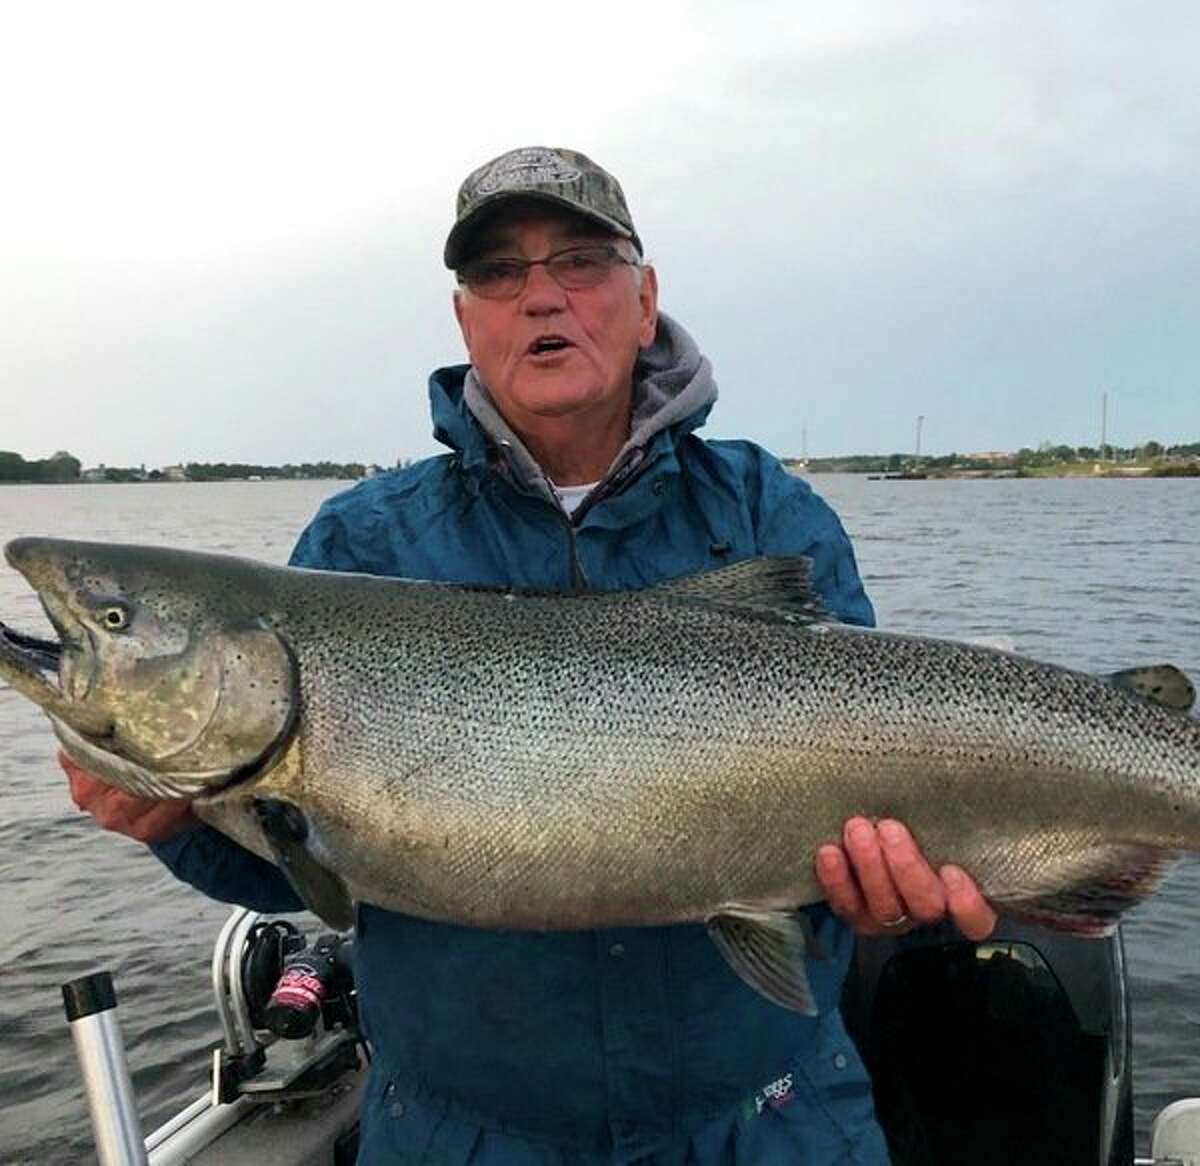 Mike Johnson, 77,  of LeRoy, Josh Johnson's father, caught a salmon which was 28 pounds and 42 inches, recently. (Courtesy photo)